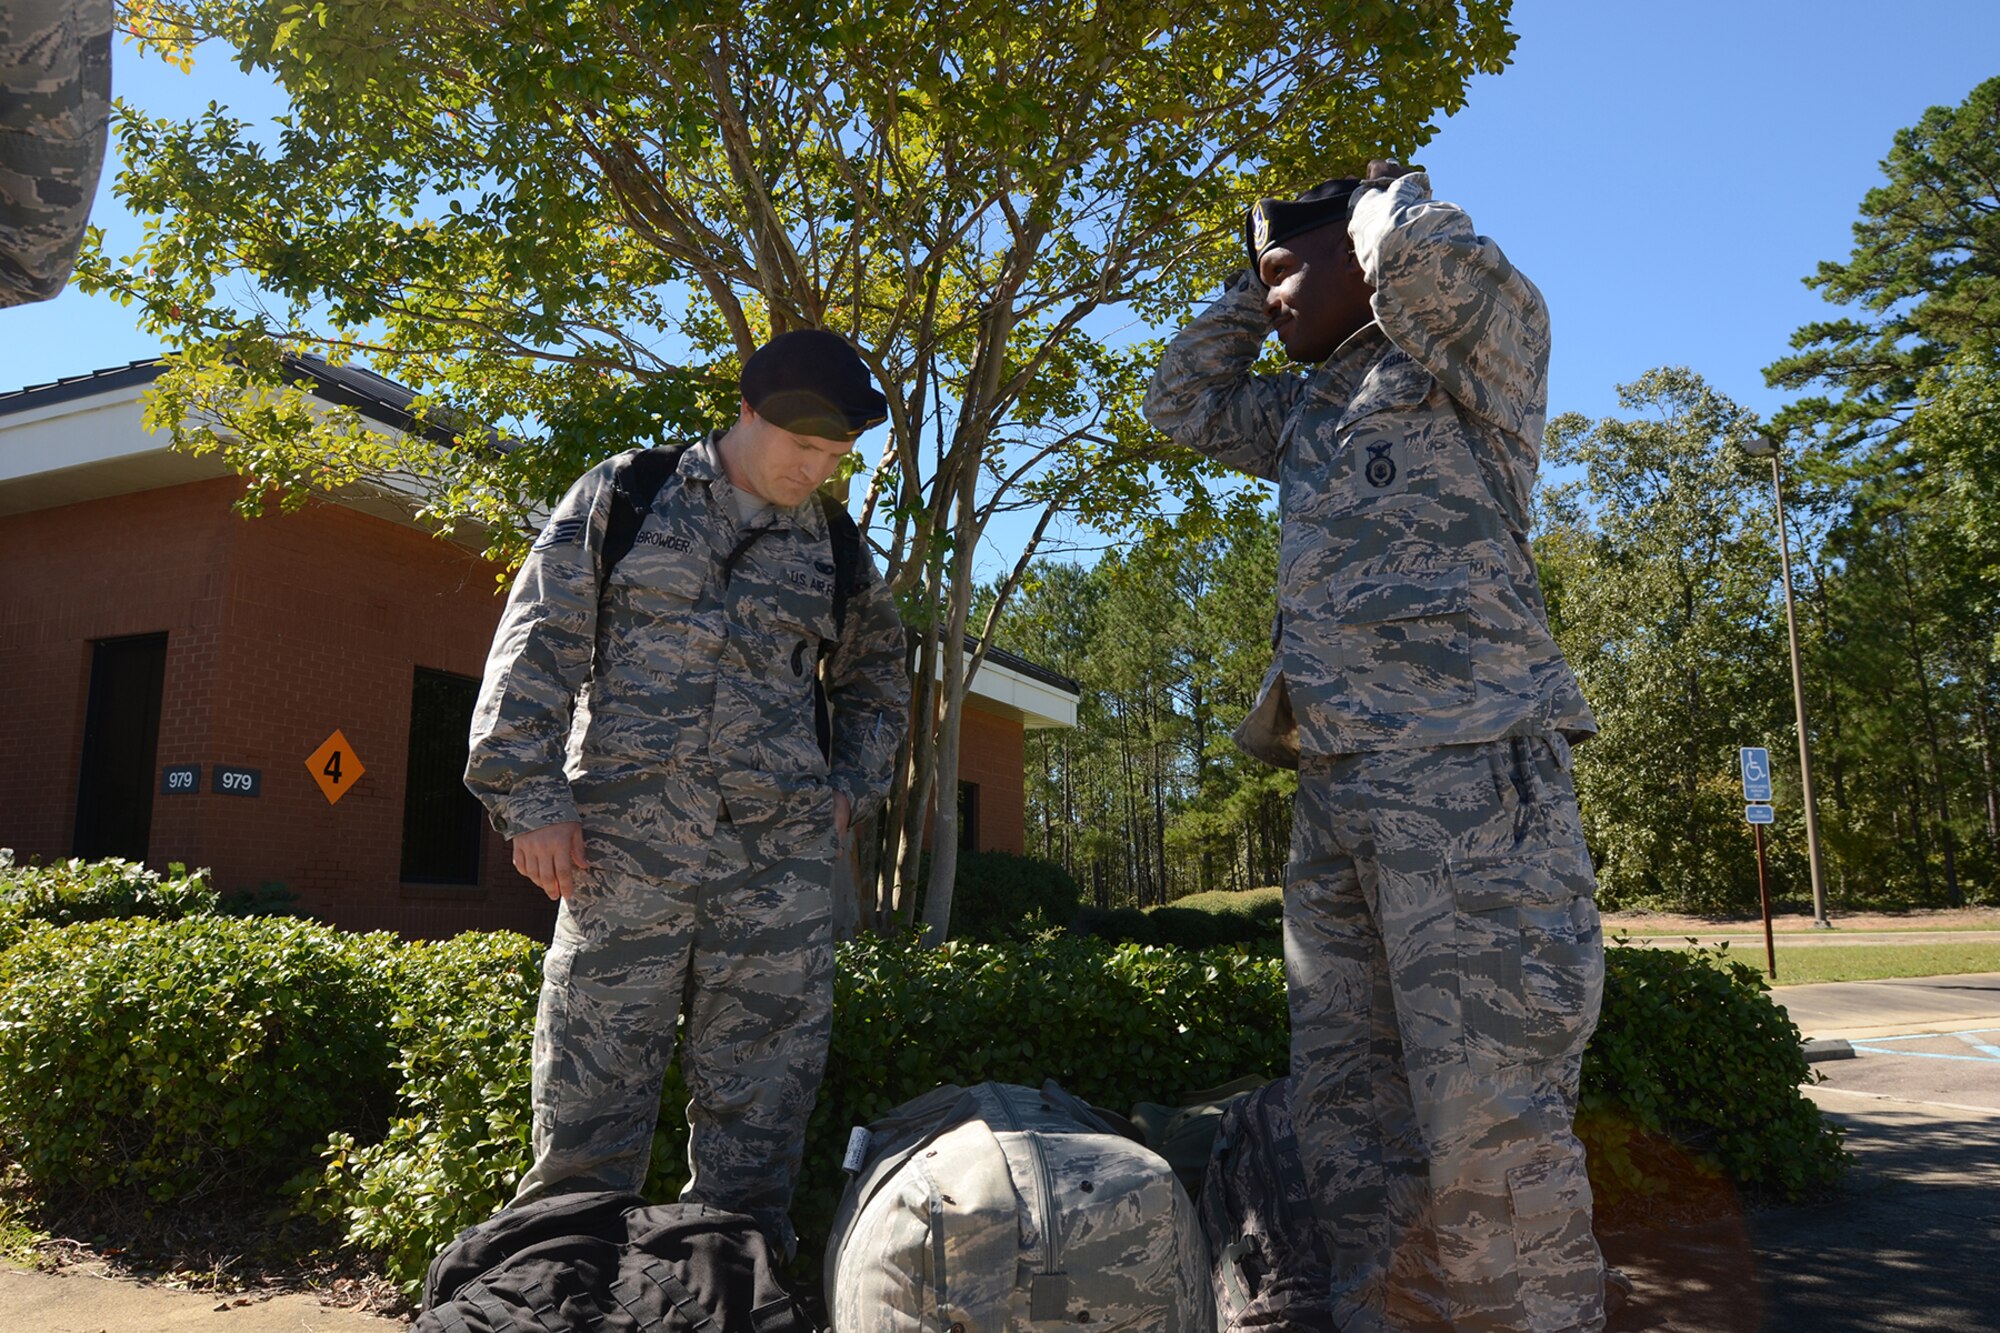 U.S. Airmen from the South Carolina National Guard's 169th Security Forces Squadron from McEntire Joint National Guard Base, S.C. prepare to relocate to St. Matthews, S.C., to assist law enforcement officers as recovery efforts from Hurricane Matthew continue, Oct. 9, 2016. Approximately 2,000 South Carolina National Guard Soldiers and Airmen have been activated since Oct. 4, 2016. Their primary mission is supporting state and county emergency management agencies and local first responders with coastal evacuations and any services or resources needed to assist the citizens of South Carolina after Governor Nikki Haley declared a State of Emergency. Hurricane Matthew peaked as a Category 4 hurricane in the Caribbean and was projected to pass along the S.C. coast. (U.S. Air National Guard photo by Airman 1st Class Megan Floyd)